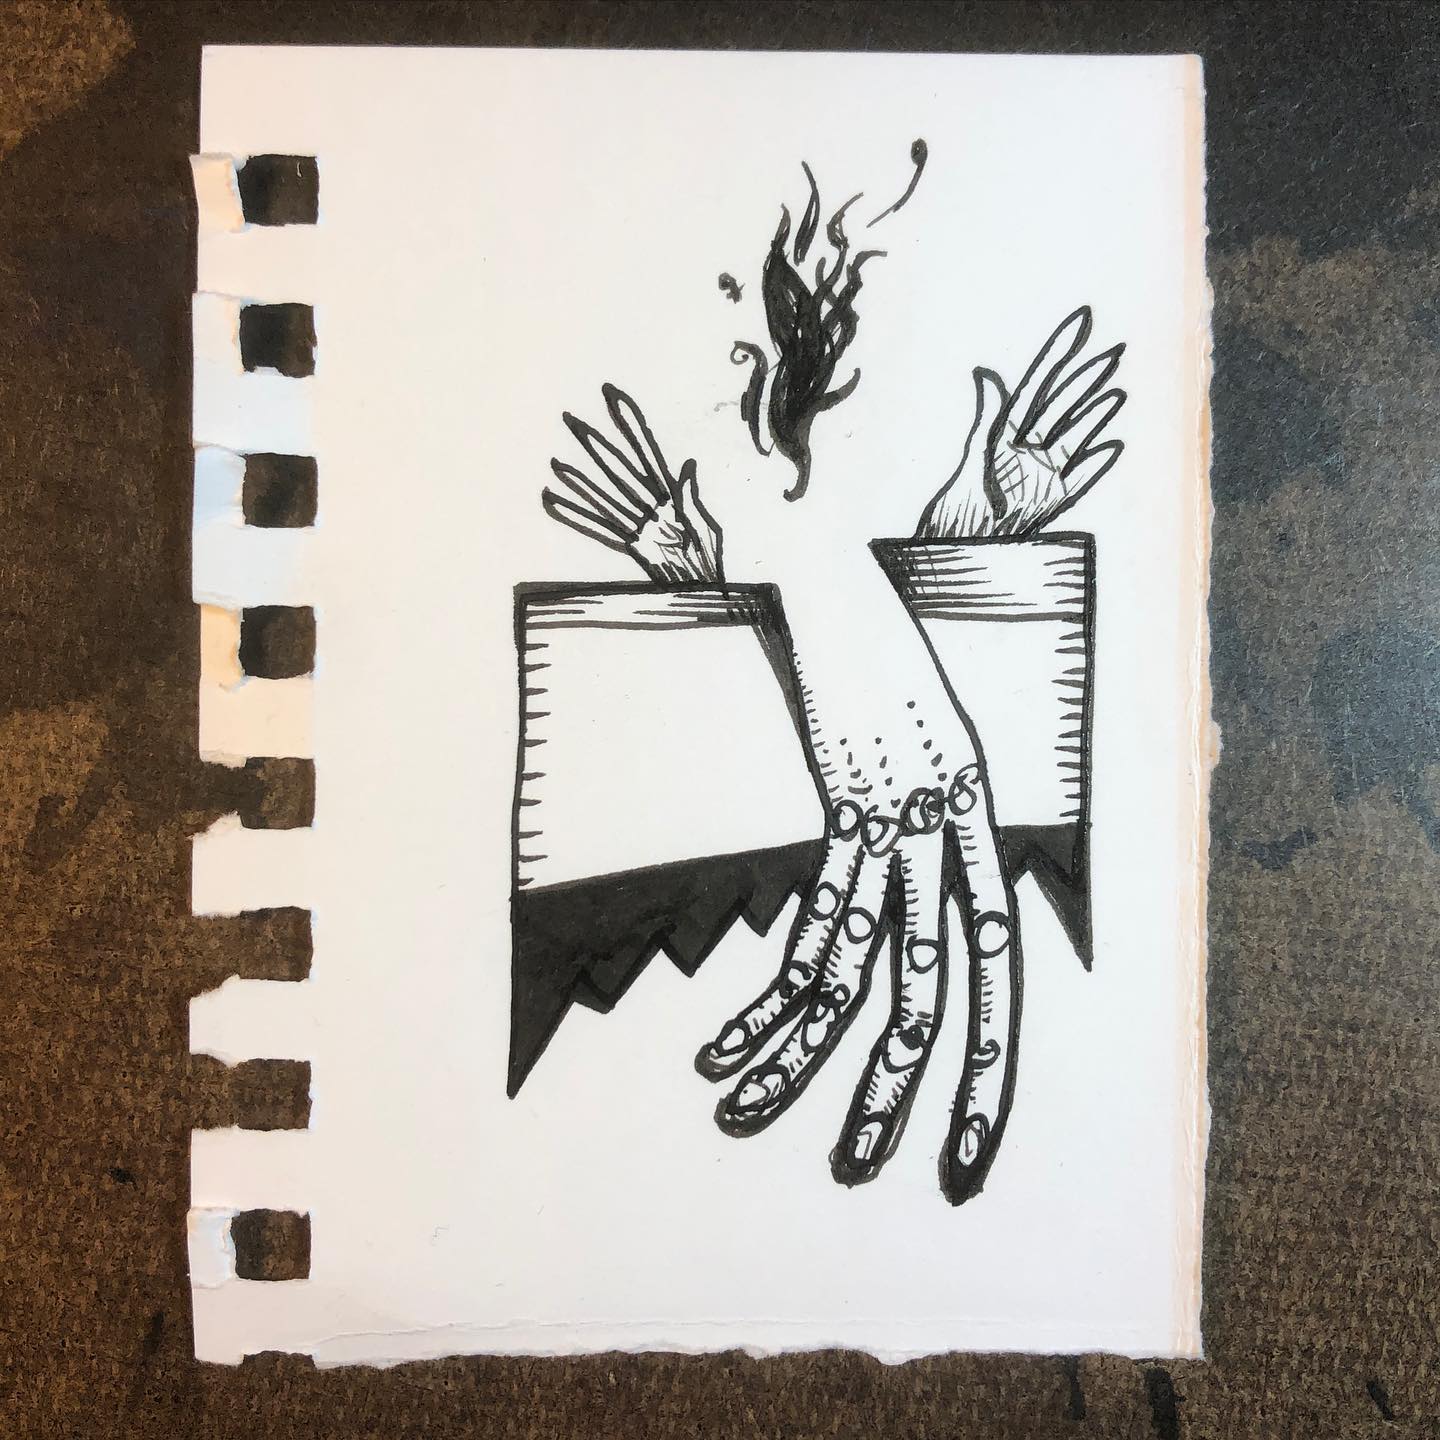 Ink Drawing - "Hand Banner"